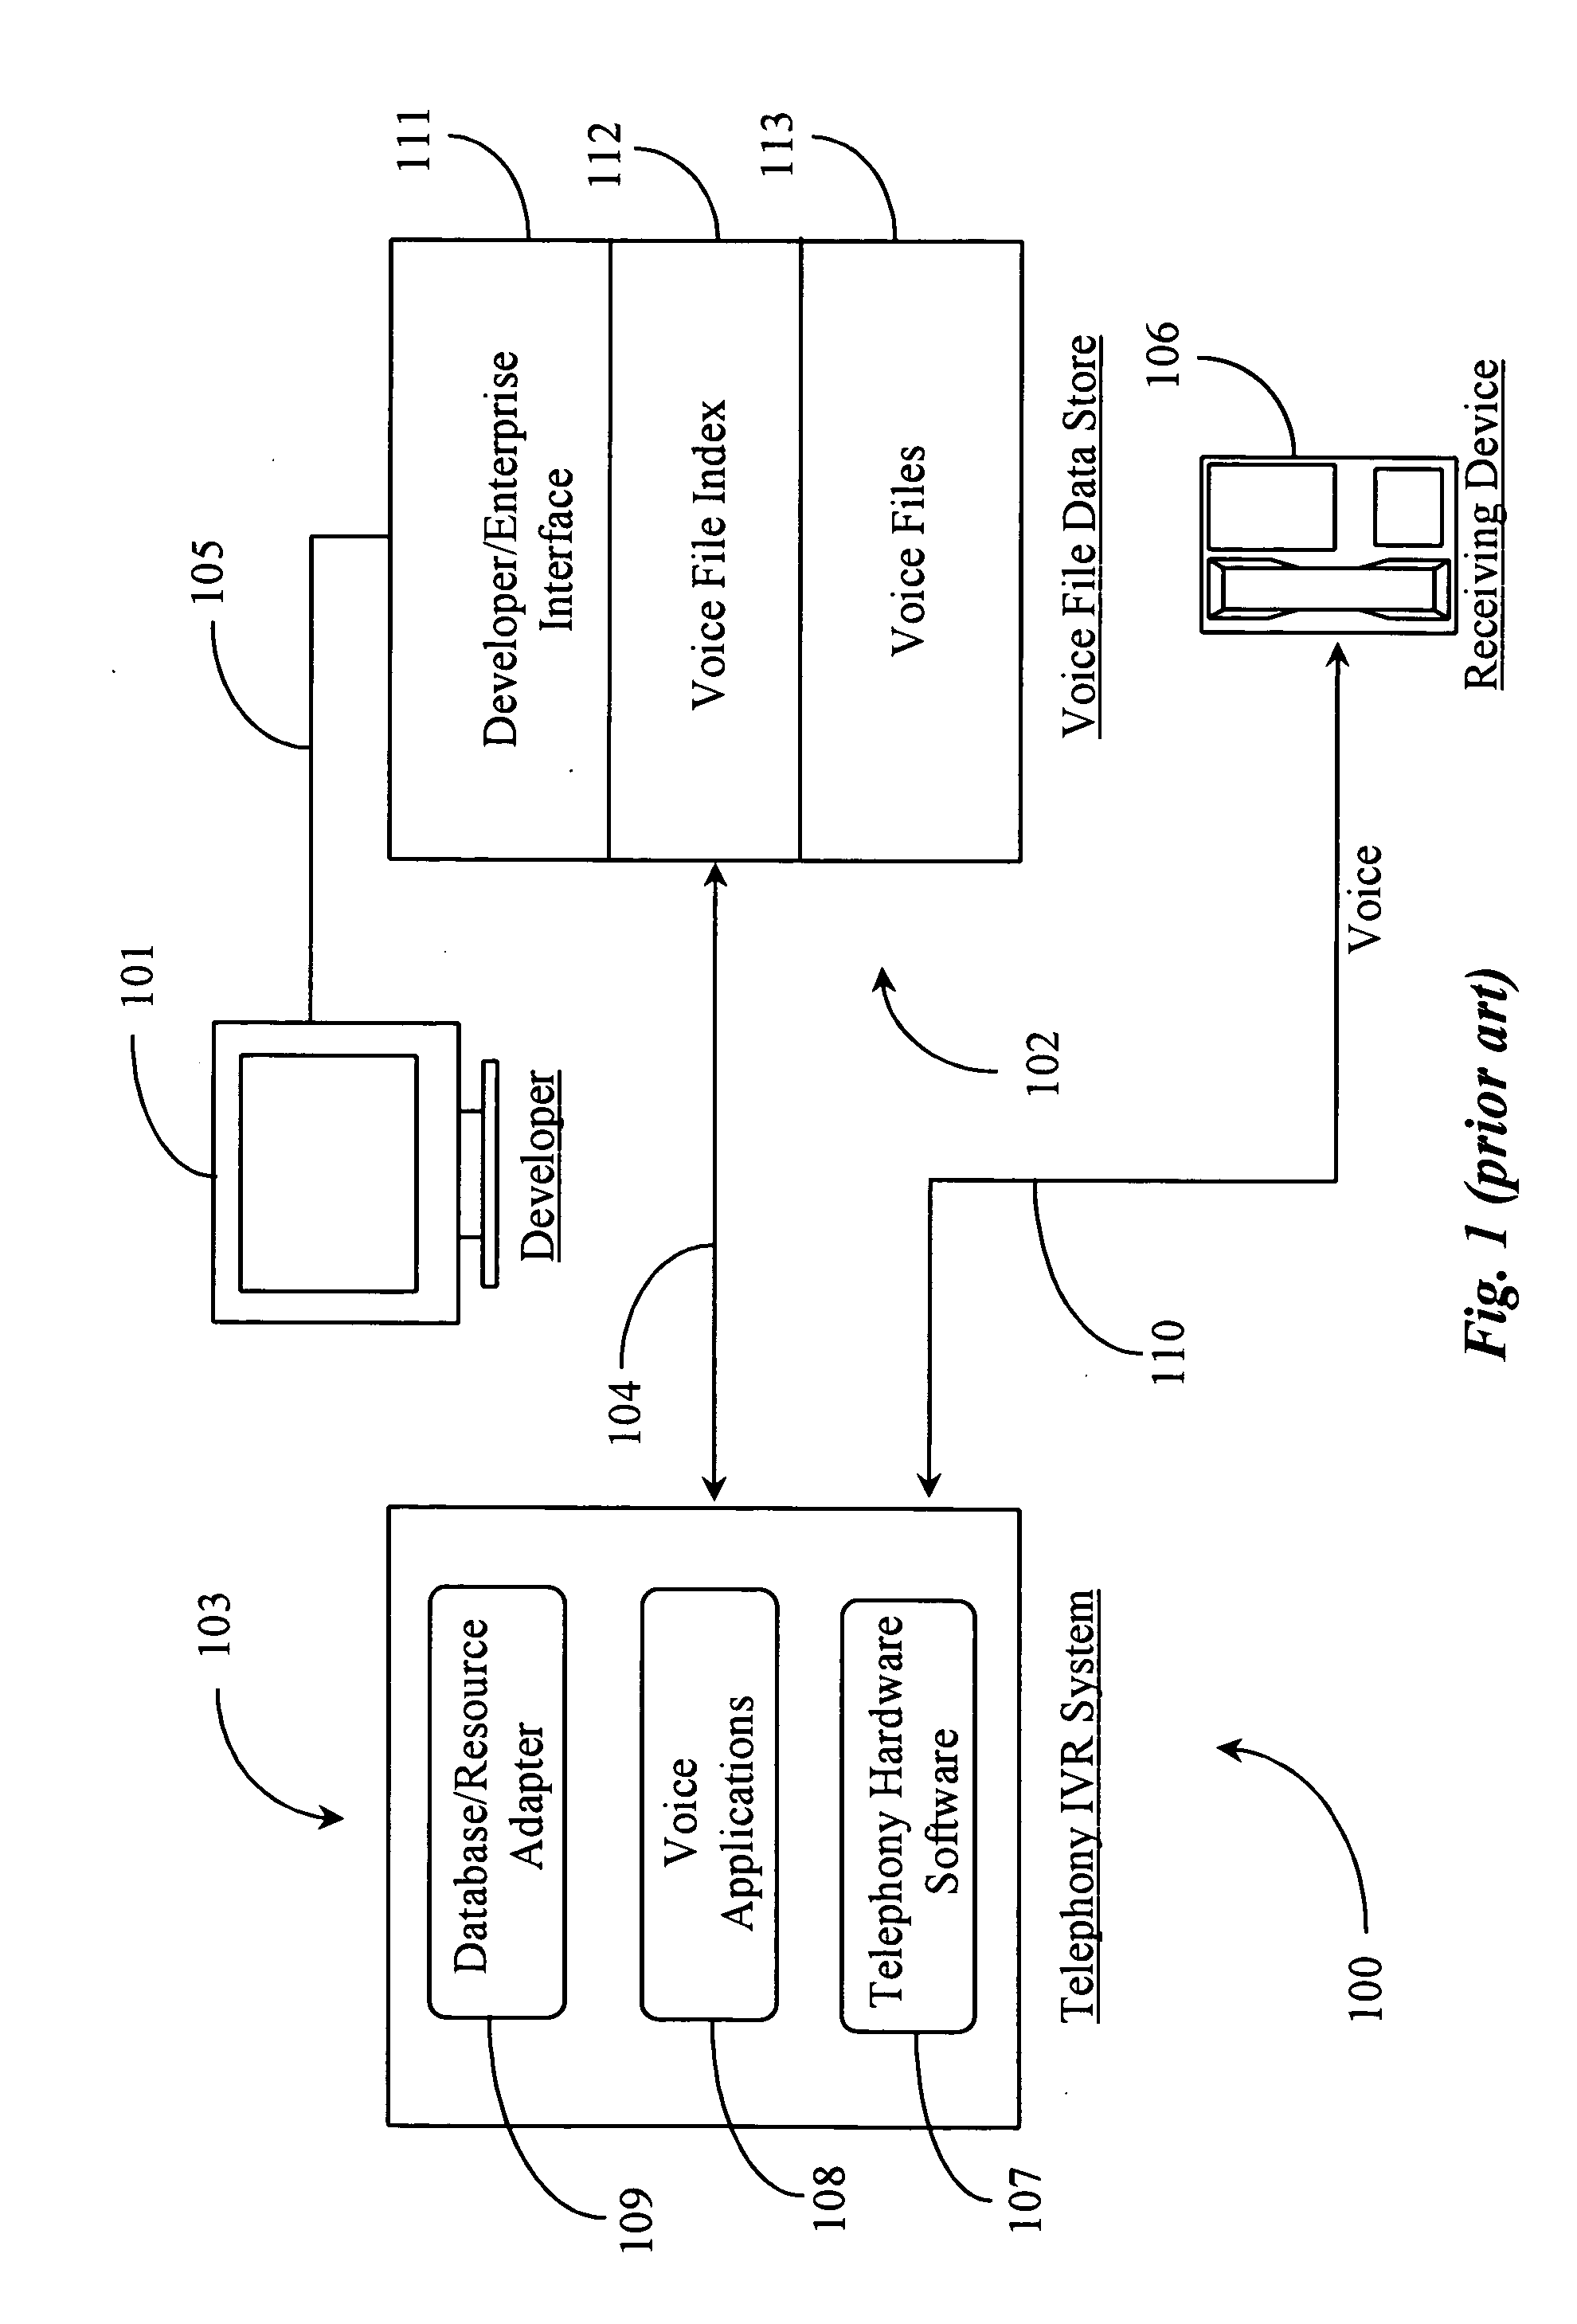 Method for creating and deploying system changes in a voice application system